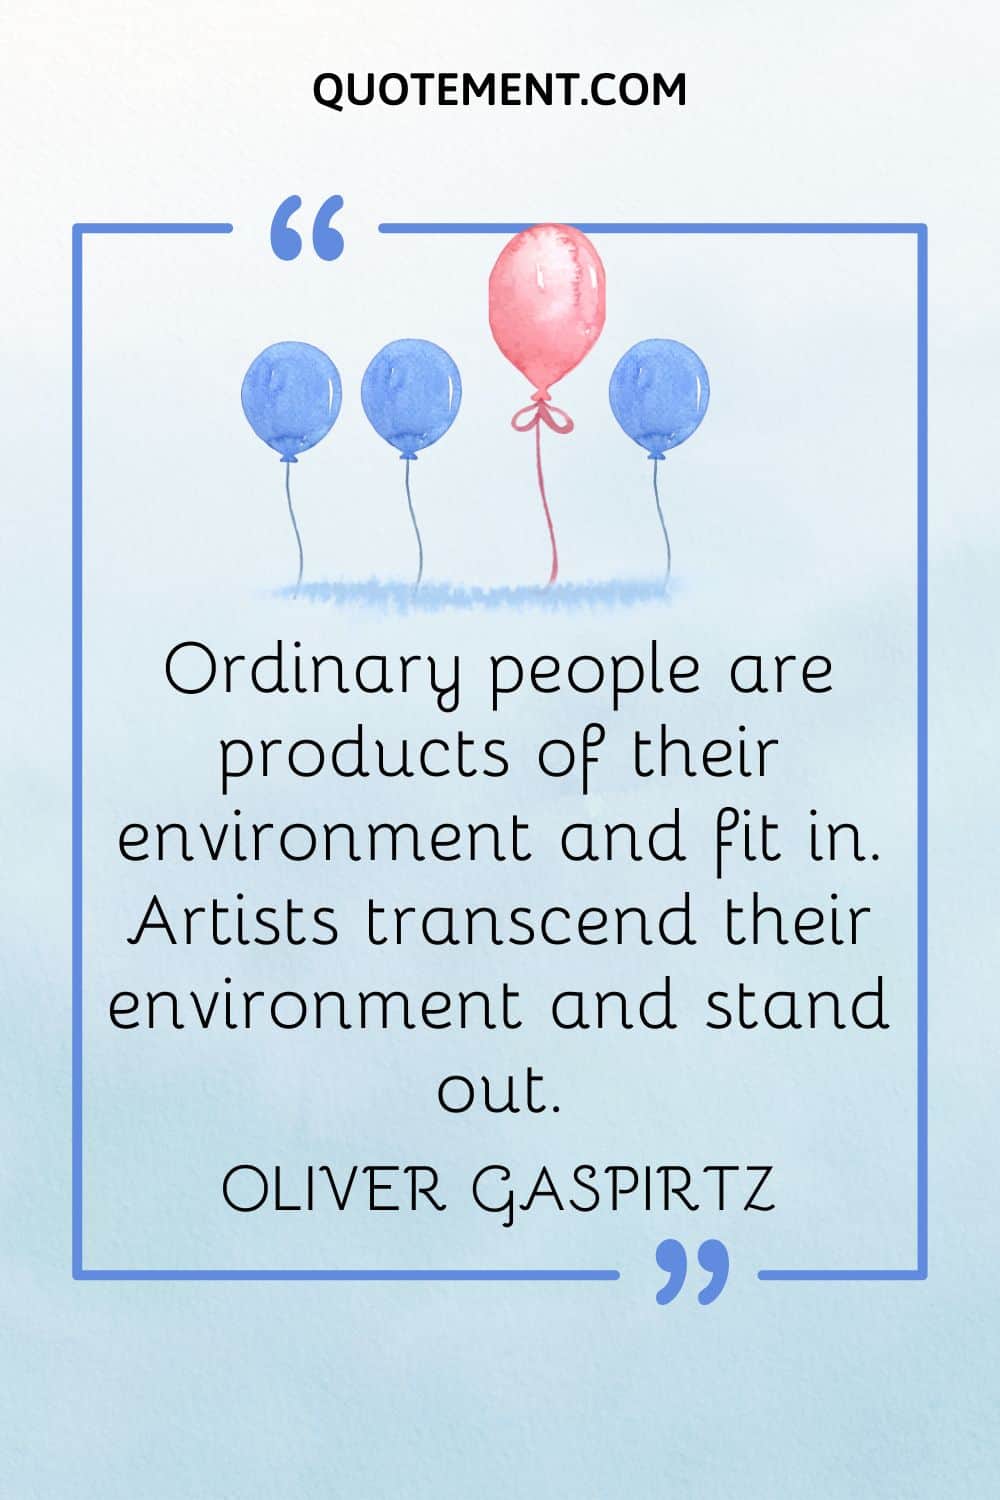 Ordinary people are products of their environment and fit in.